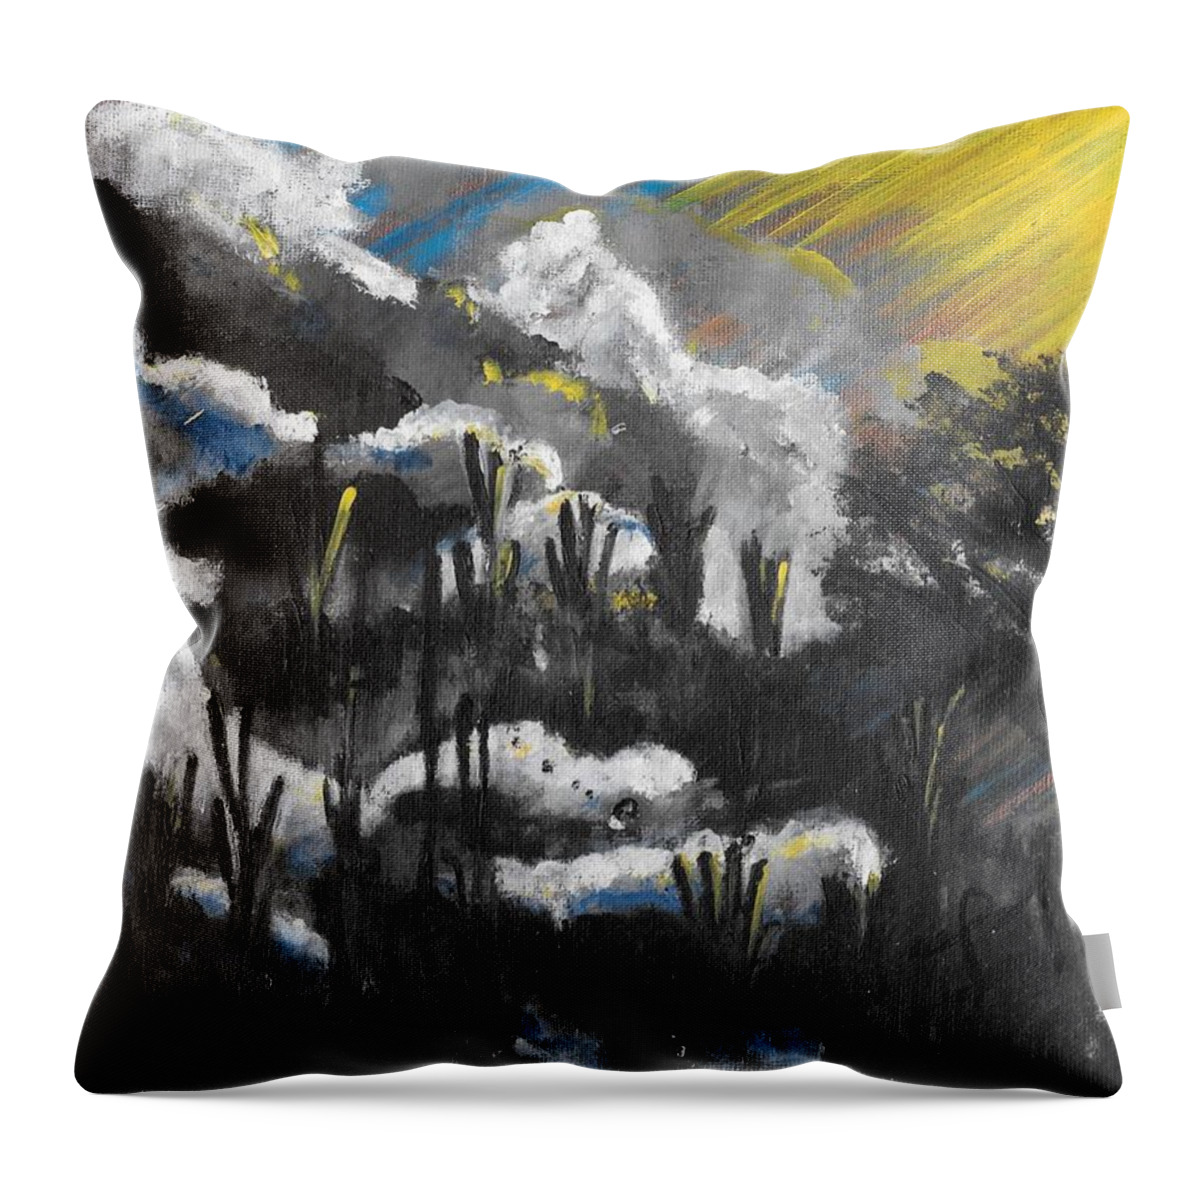 Mystical Throw Pillow featuring the painting Mystical Mirage by Esoteric Gardens KN